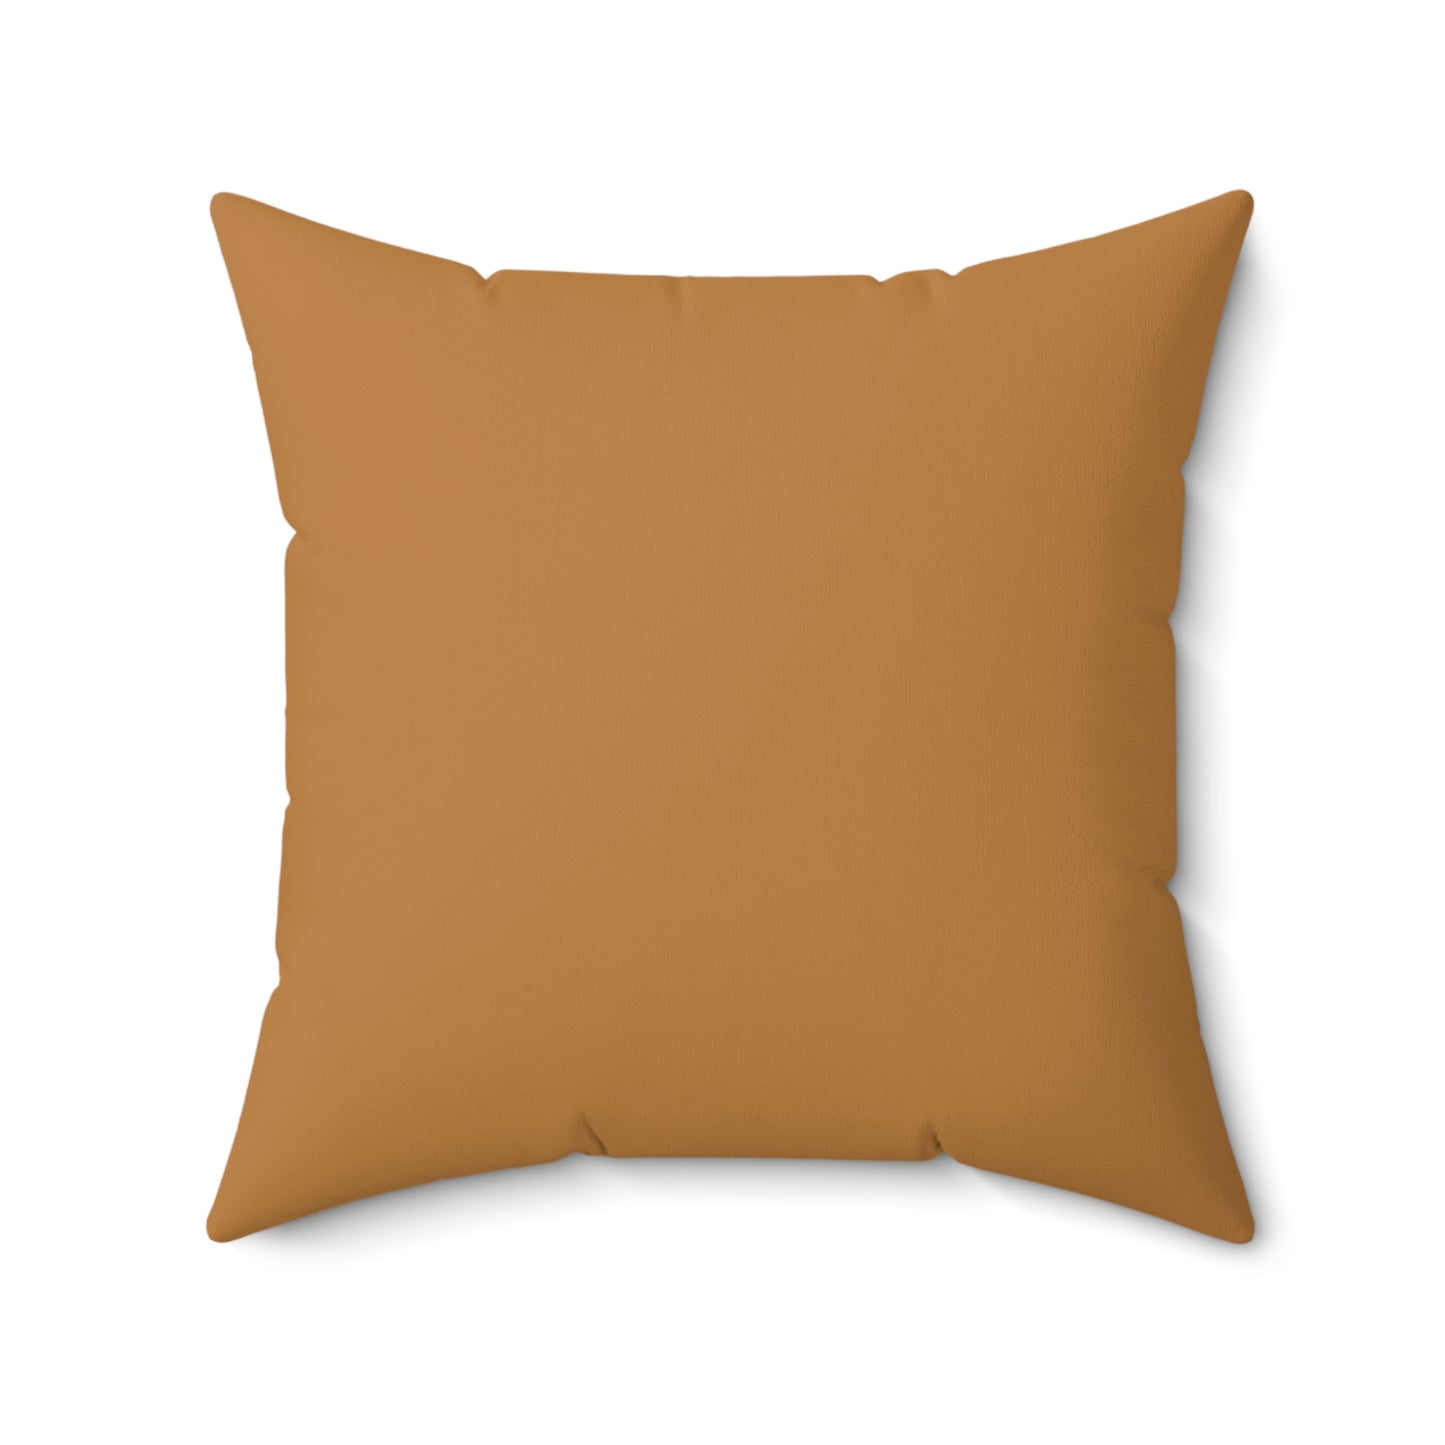 Spun Polyester Square Pillow Case "Cassettes on Light Brown”